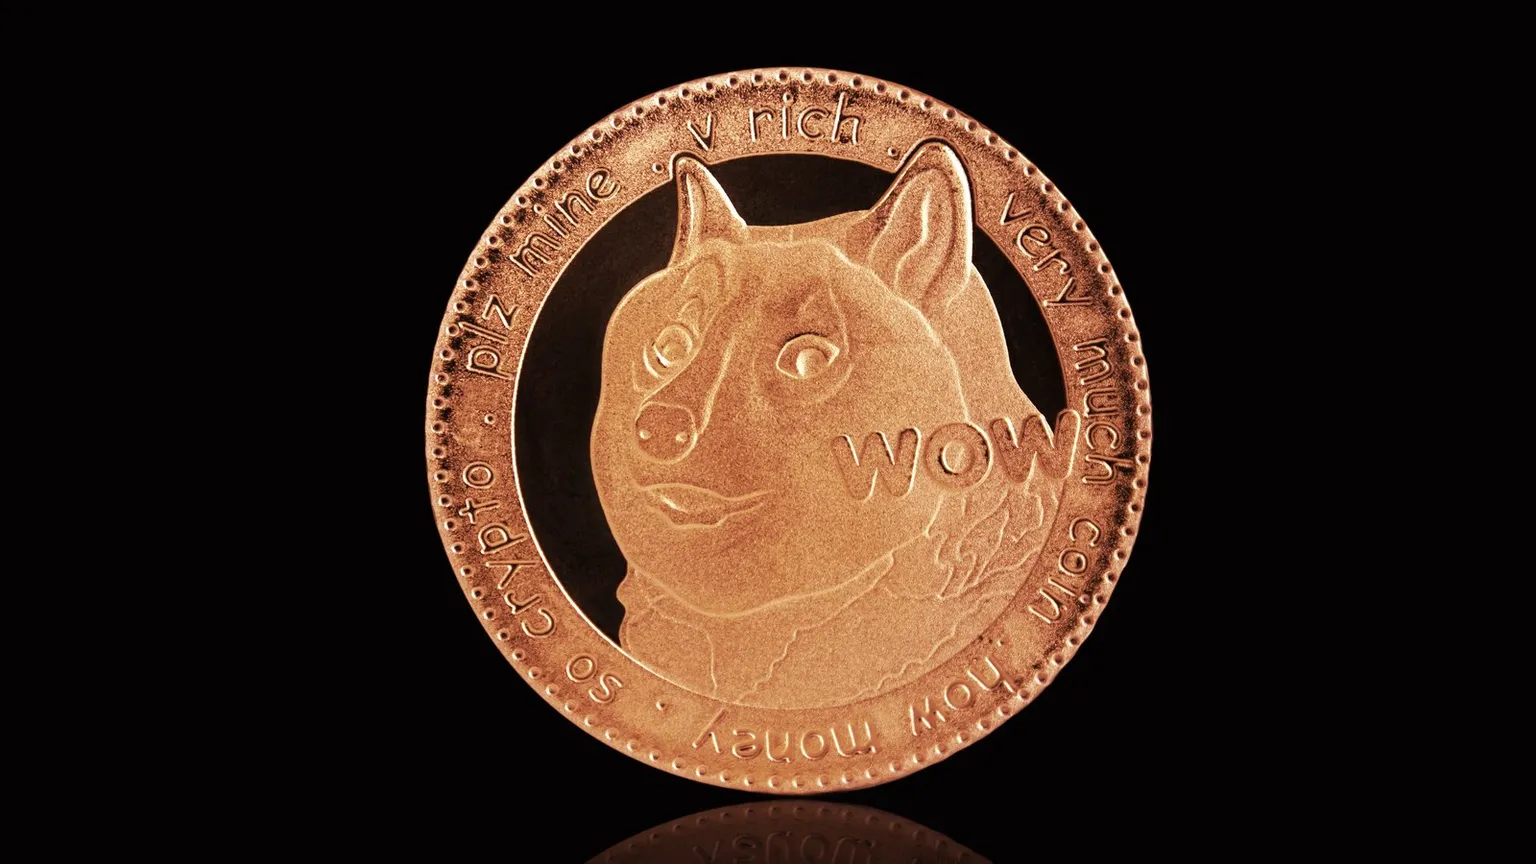 Dogecoin (DOGE) is one of the most popular cryptocurrencies in the world. Image: Shutterstock